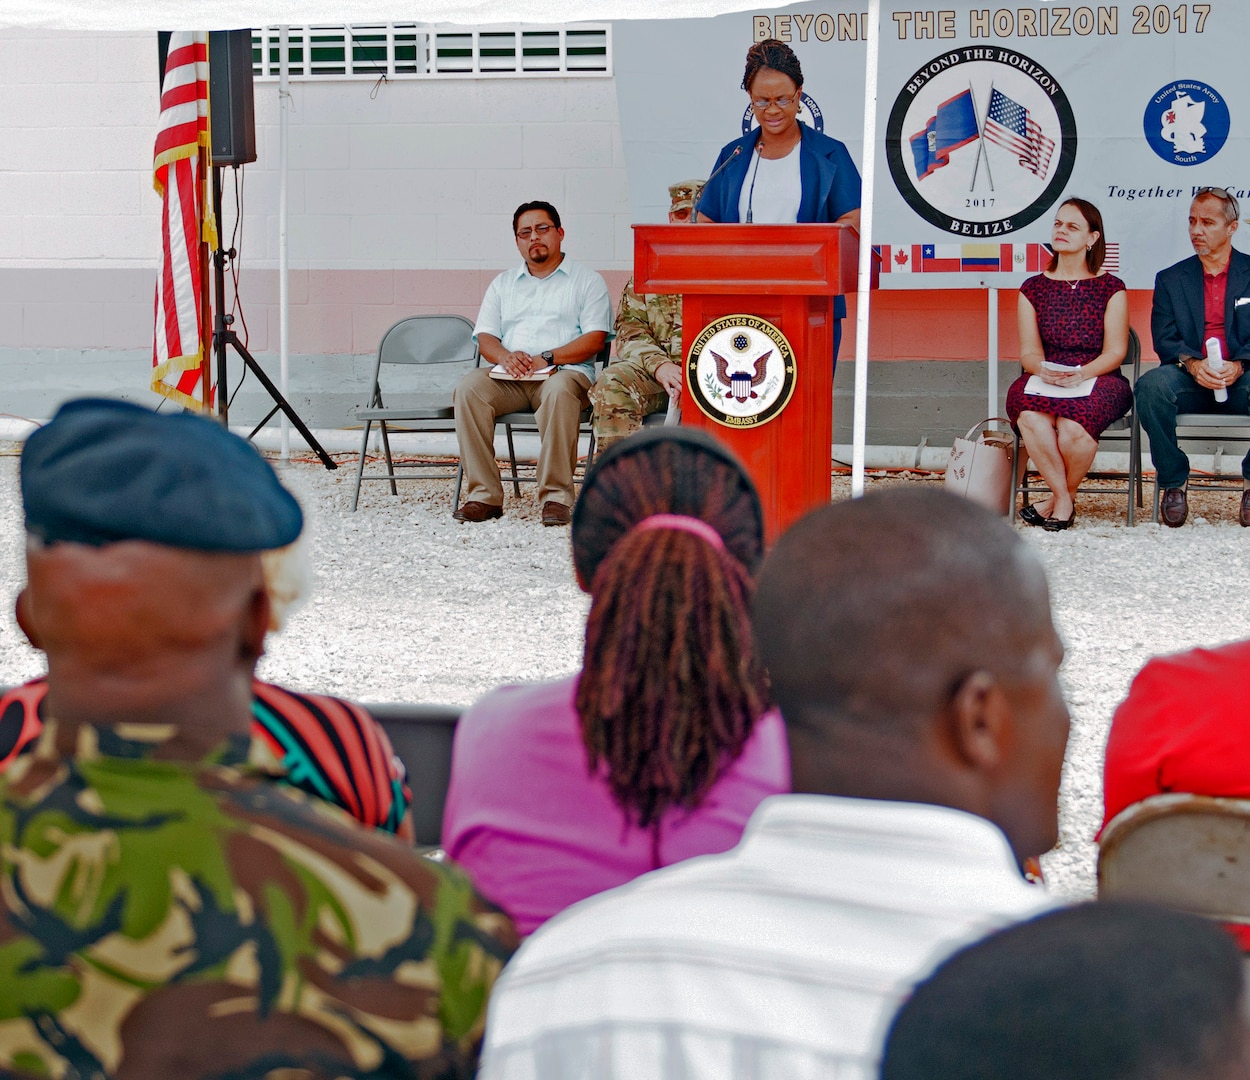 Nurse Sharon Espinoza, Ministry of Health nursing supervisor, speaks at the Ladyville Health Center ribbon-cutting ceremony June 9 in Ladyville, Belize. Construction of the building was completed as part of Beyond the Horizon 2017, a collaborative training exercise between U.S. Army South, the Belize Defence Force, other Central American nations and local and international NGOs, providing medical and engineering services throughout Belize. The new facility will more than double the capacity of the existing structure providing a wider range of availble medical options at the primary care level.